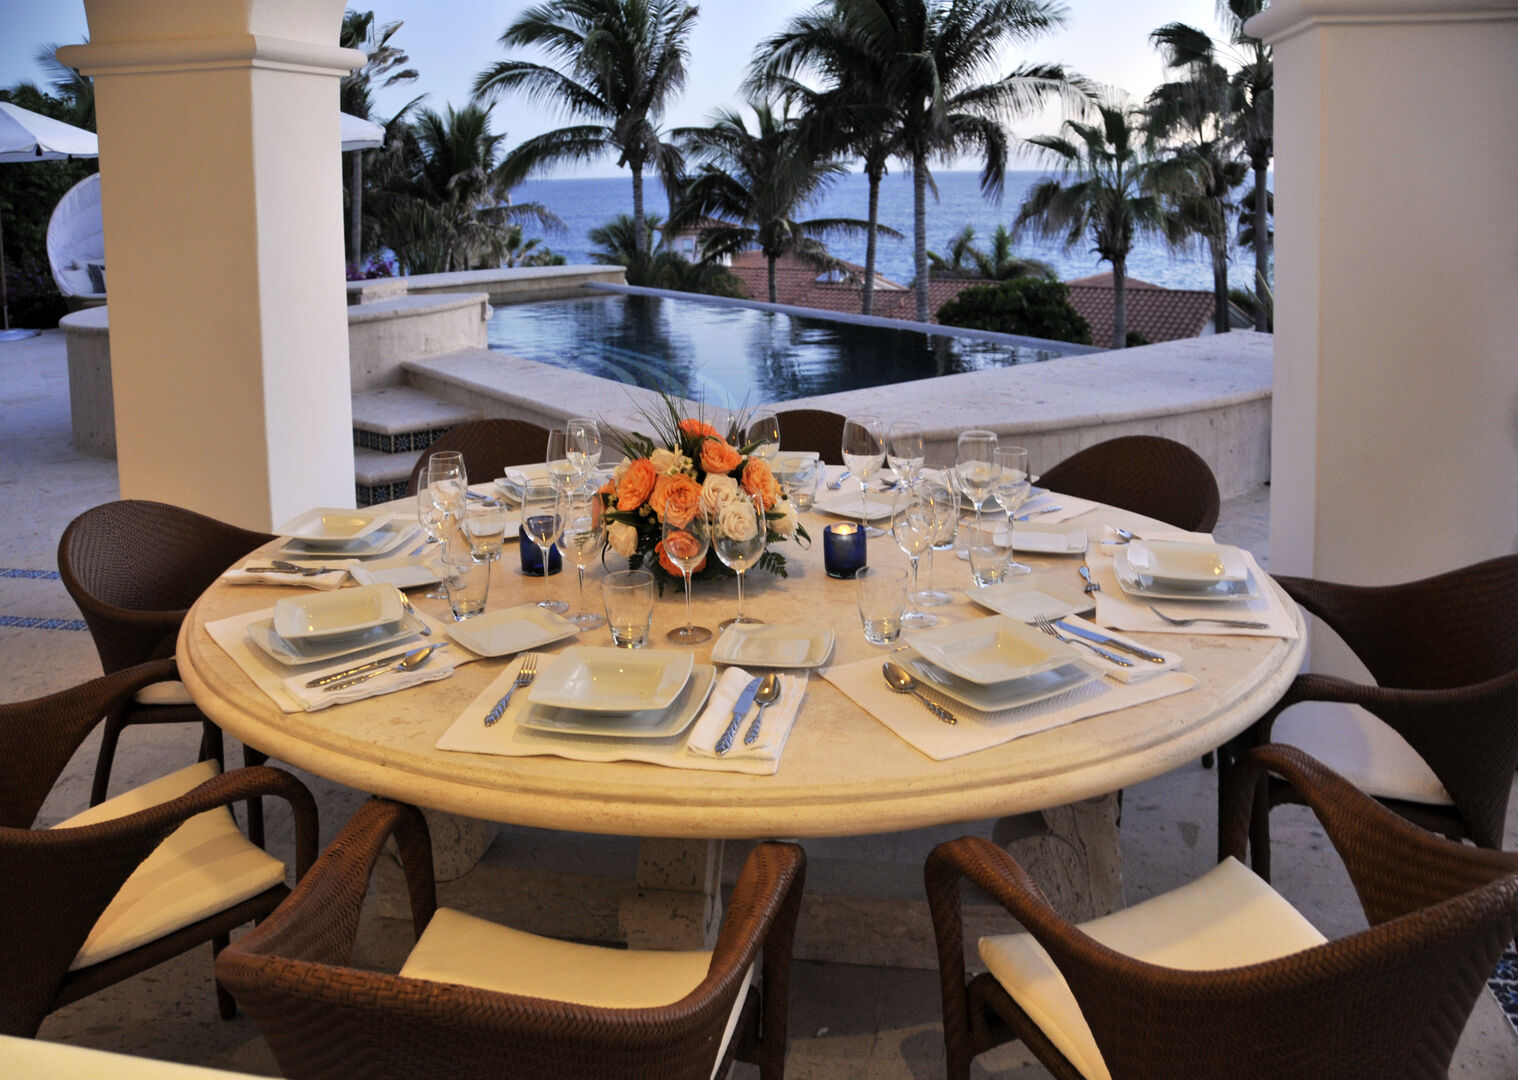 Round Outdoor Dining Table by Pool